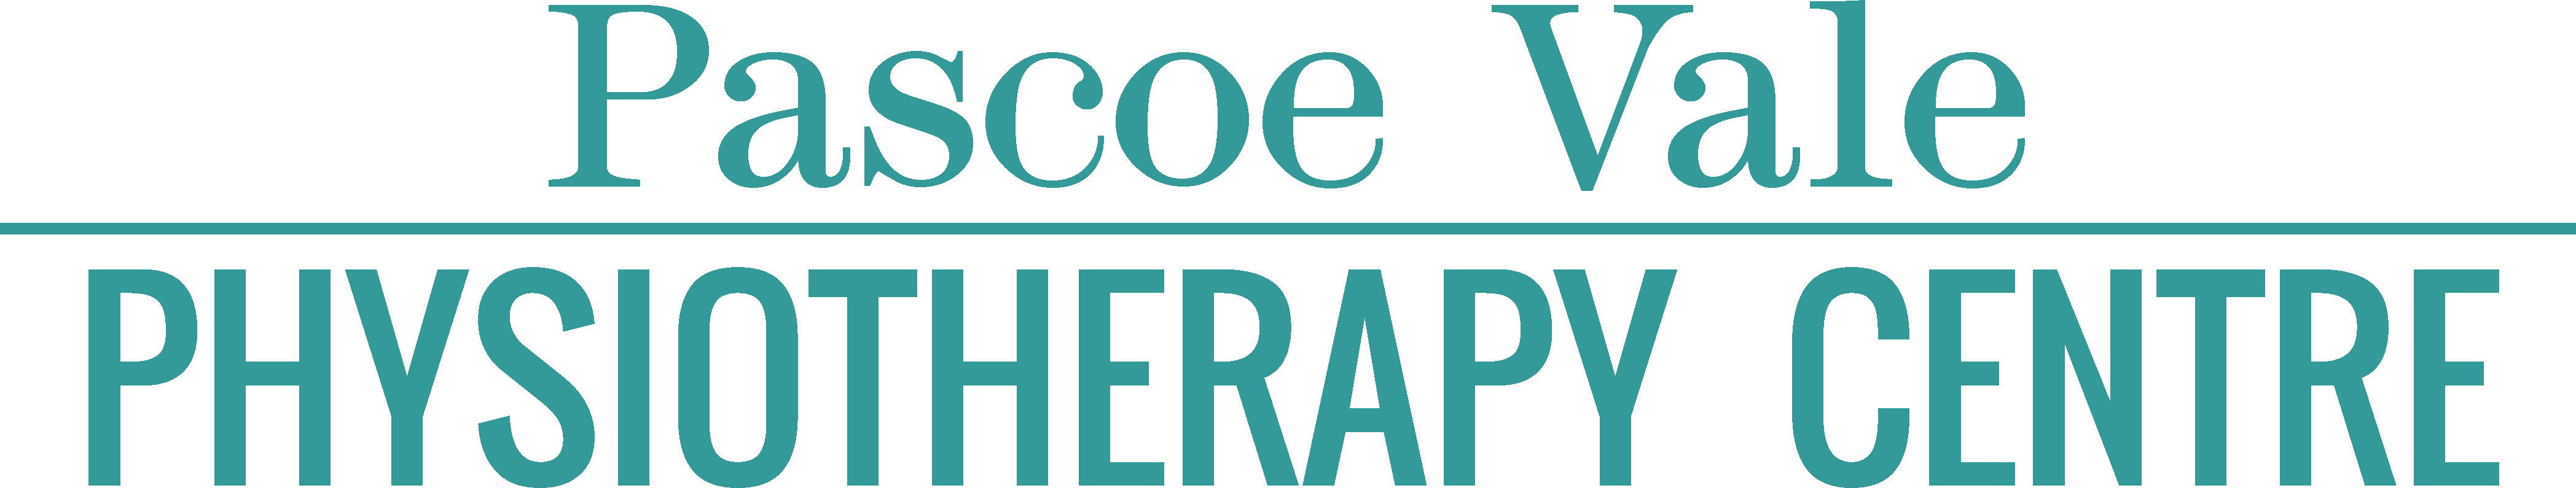 pascoe vale physiotherapy centre logo